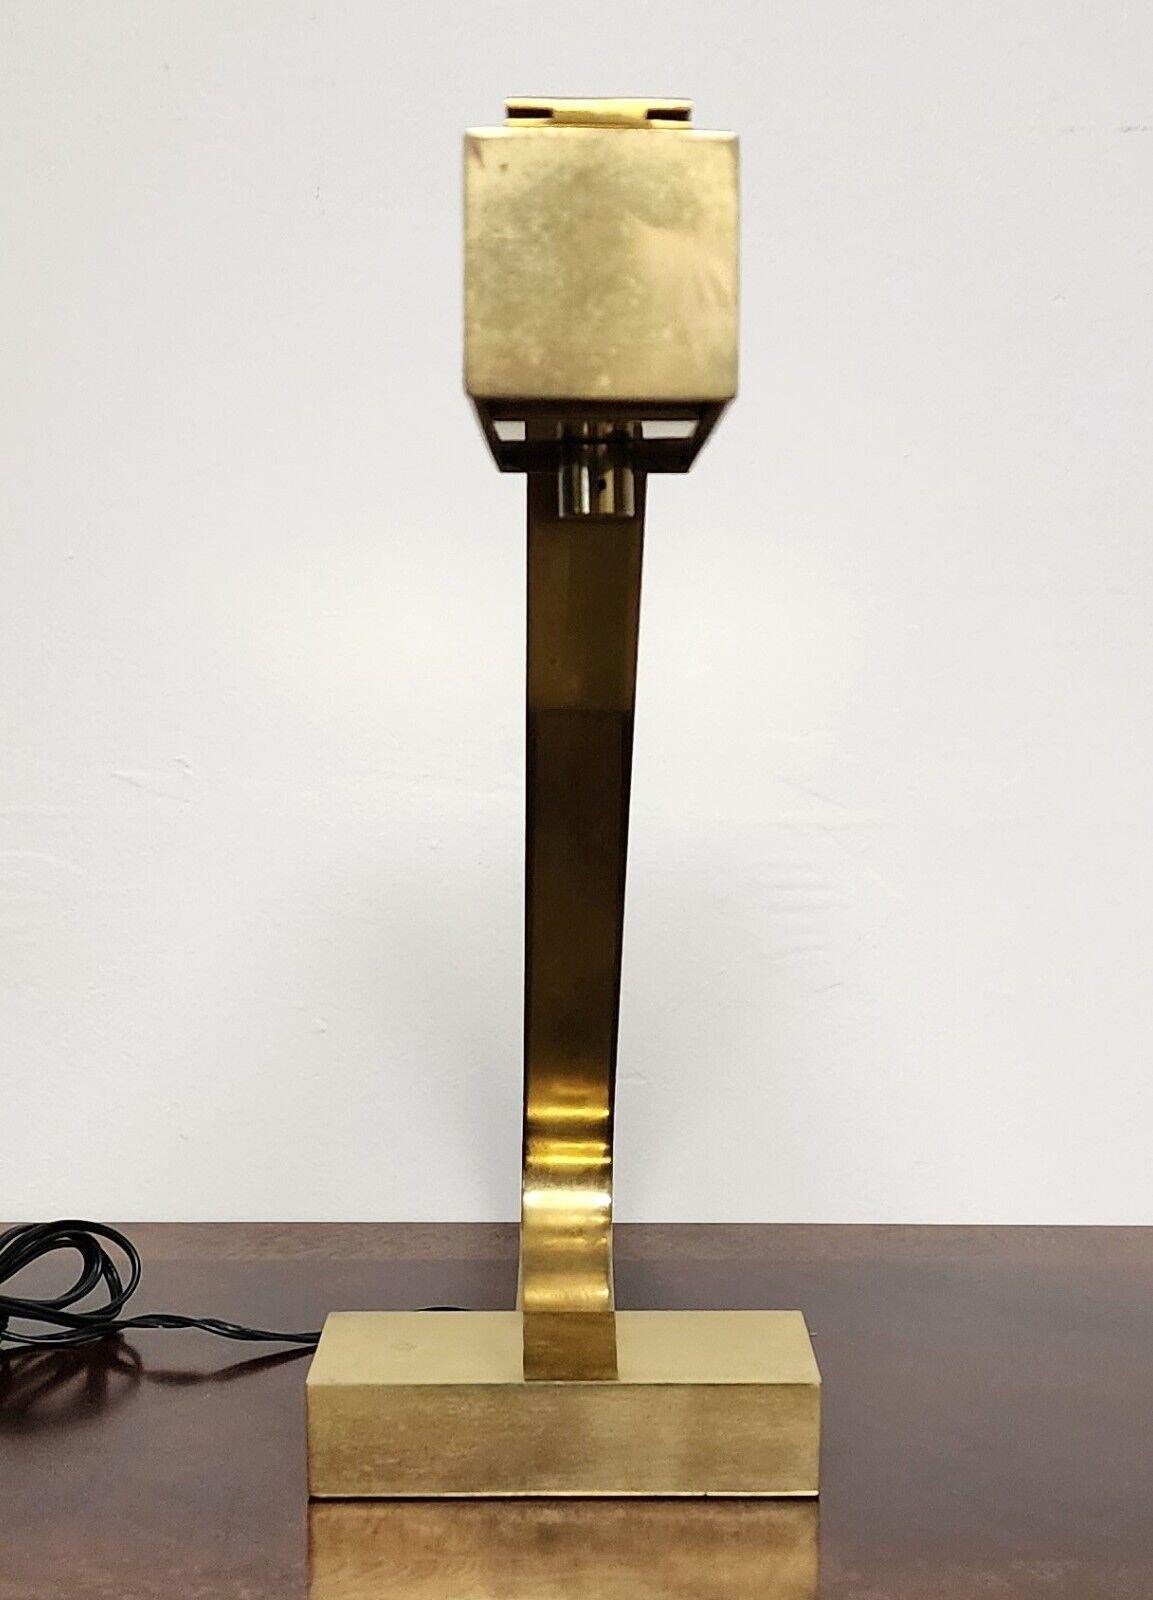 For FULL item description click on CONTINUE READING at the bottom of this page.

Offering One Of Our Recent Palm Beach Estate Fine Lighting Acquisitions Of A
1970s Rare MCM Casella Brass Flat Bar Desk Lamp 

Approximate Measurements in Inches
15.75